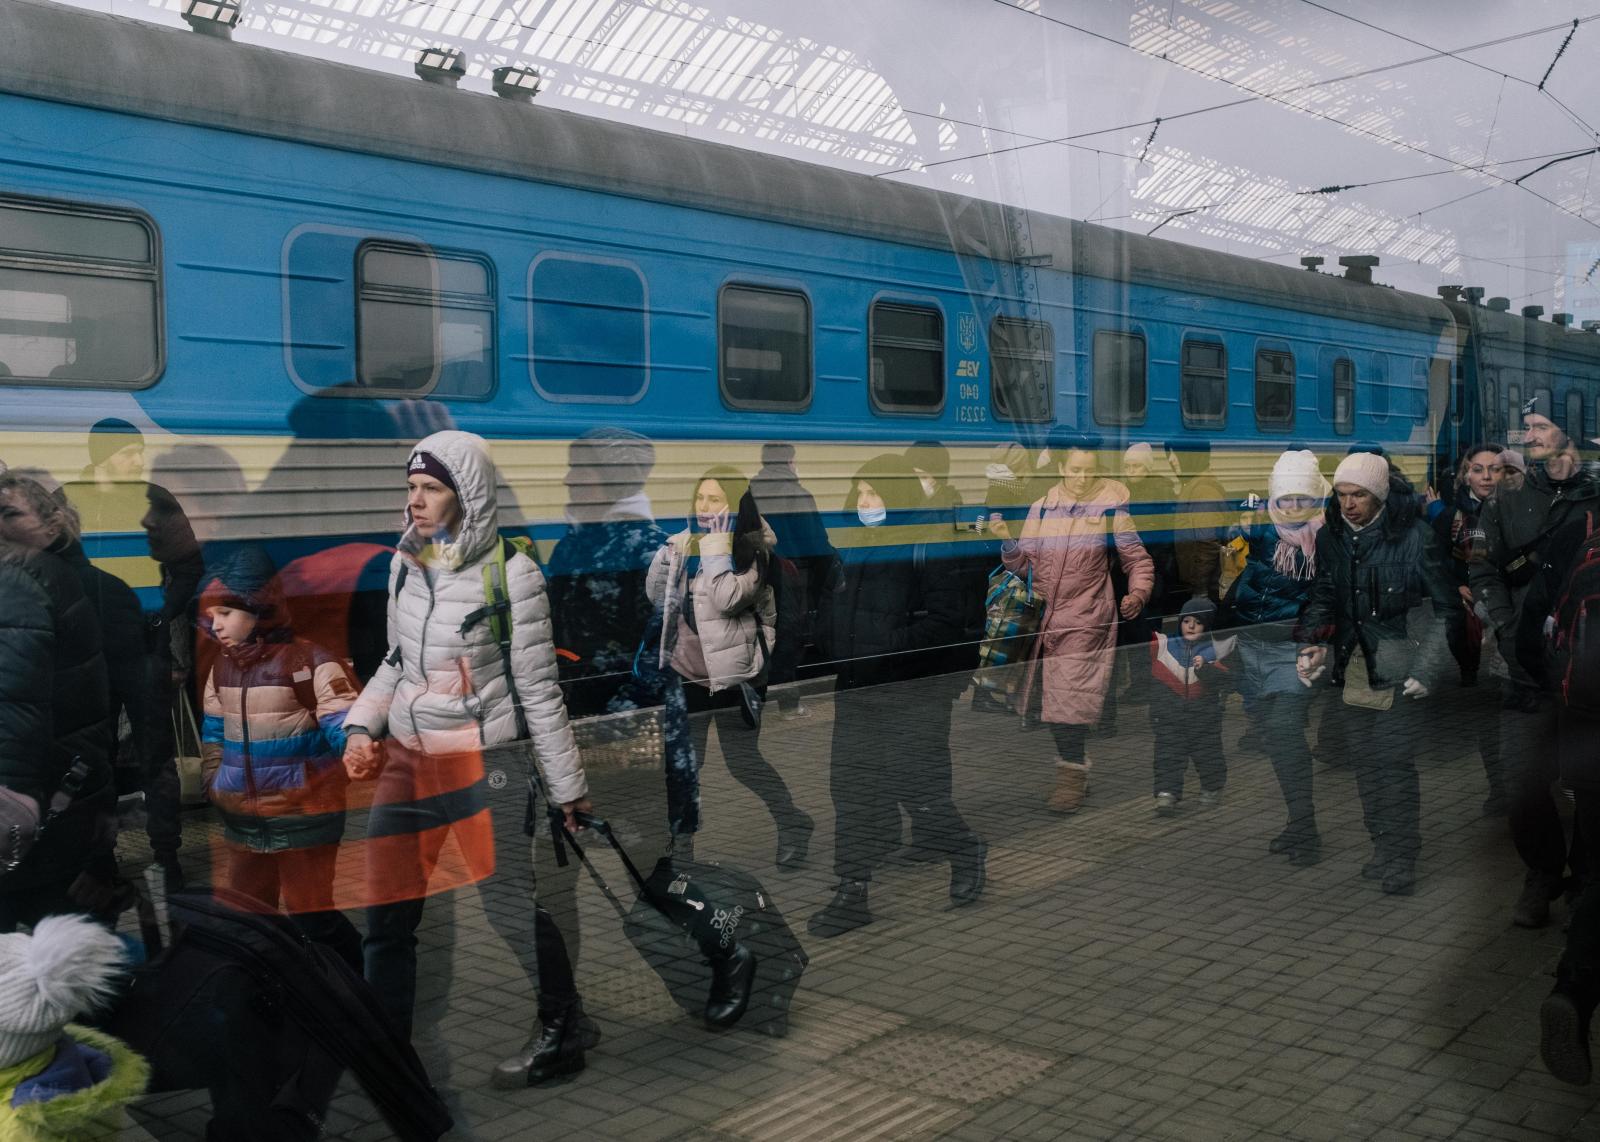 Escaping Putin's Bombs - March 4th, 2022 - Lviv Central Station